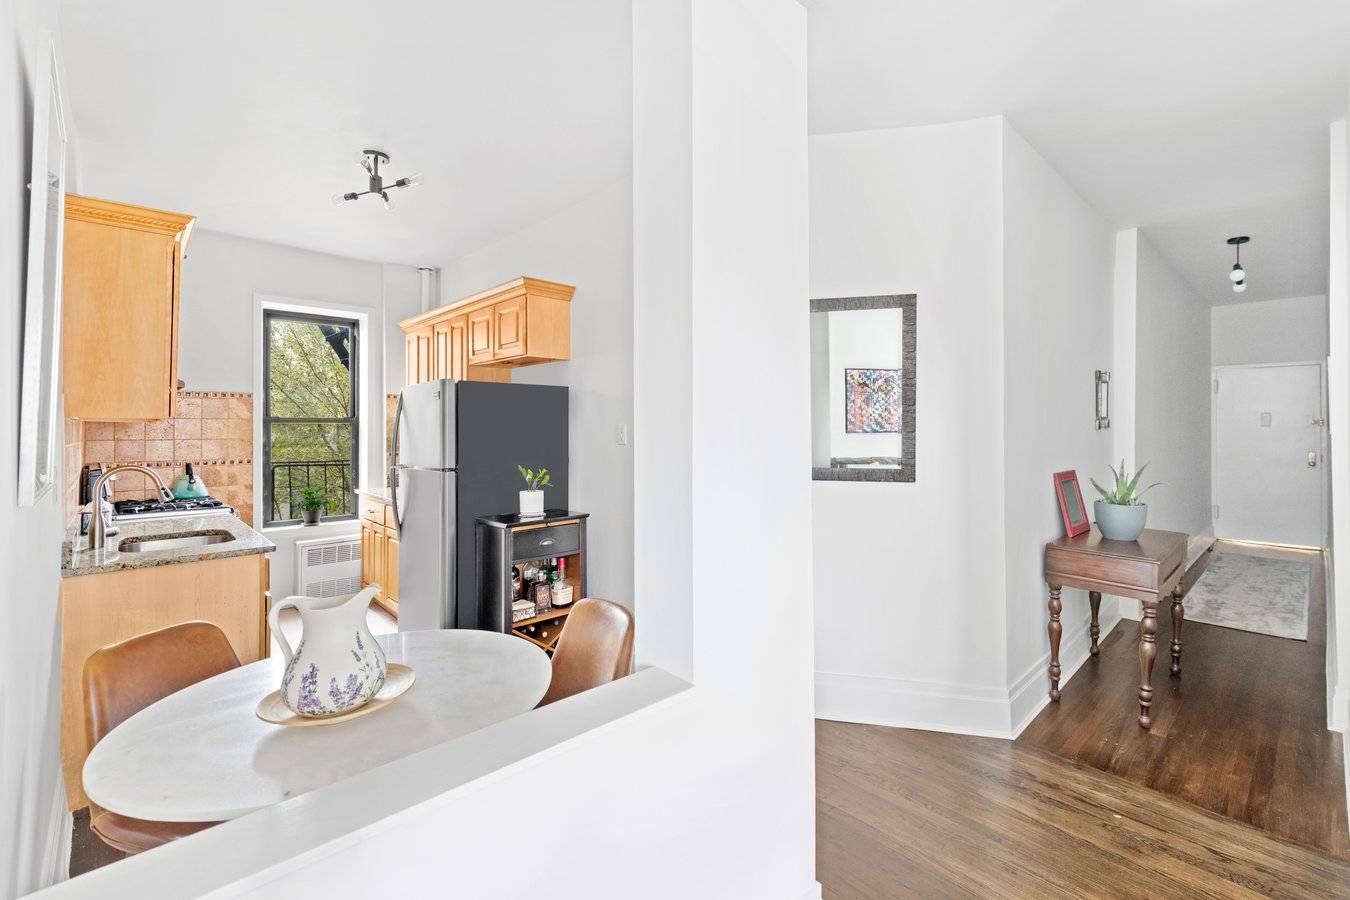 Welcome to the charming, tree lined block of Prospect Place where you will feel right at home in this wonderfully updated 1 bed 1 bath apartment.